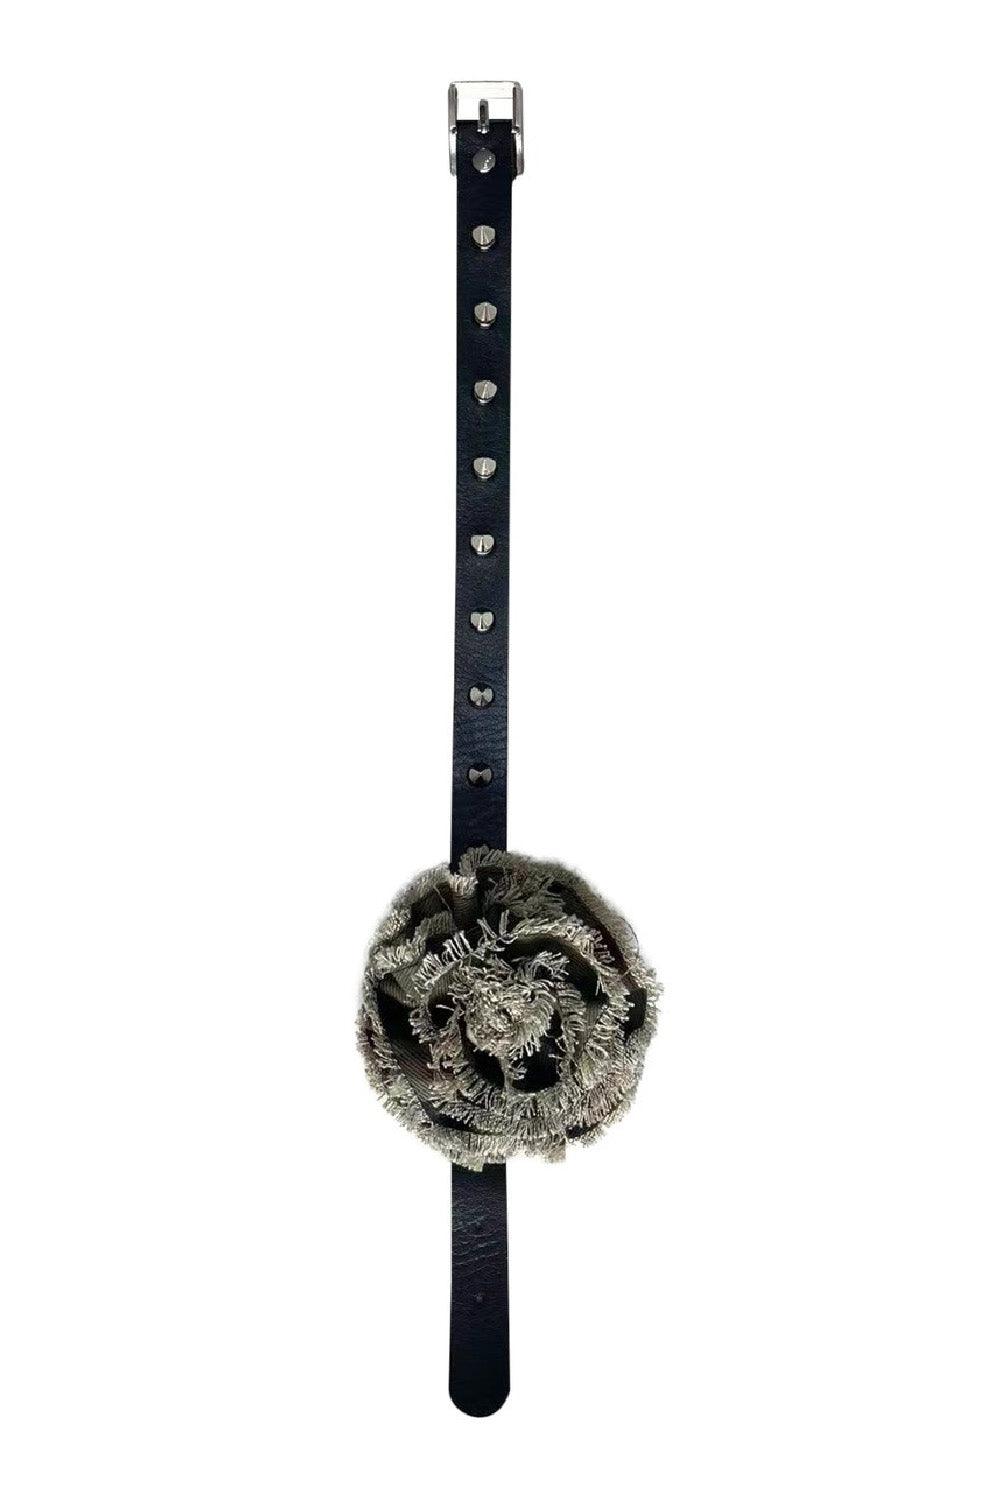 Rivet Leather Choker with Rose - Pixie Rebels